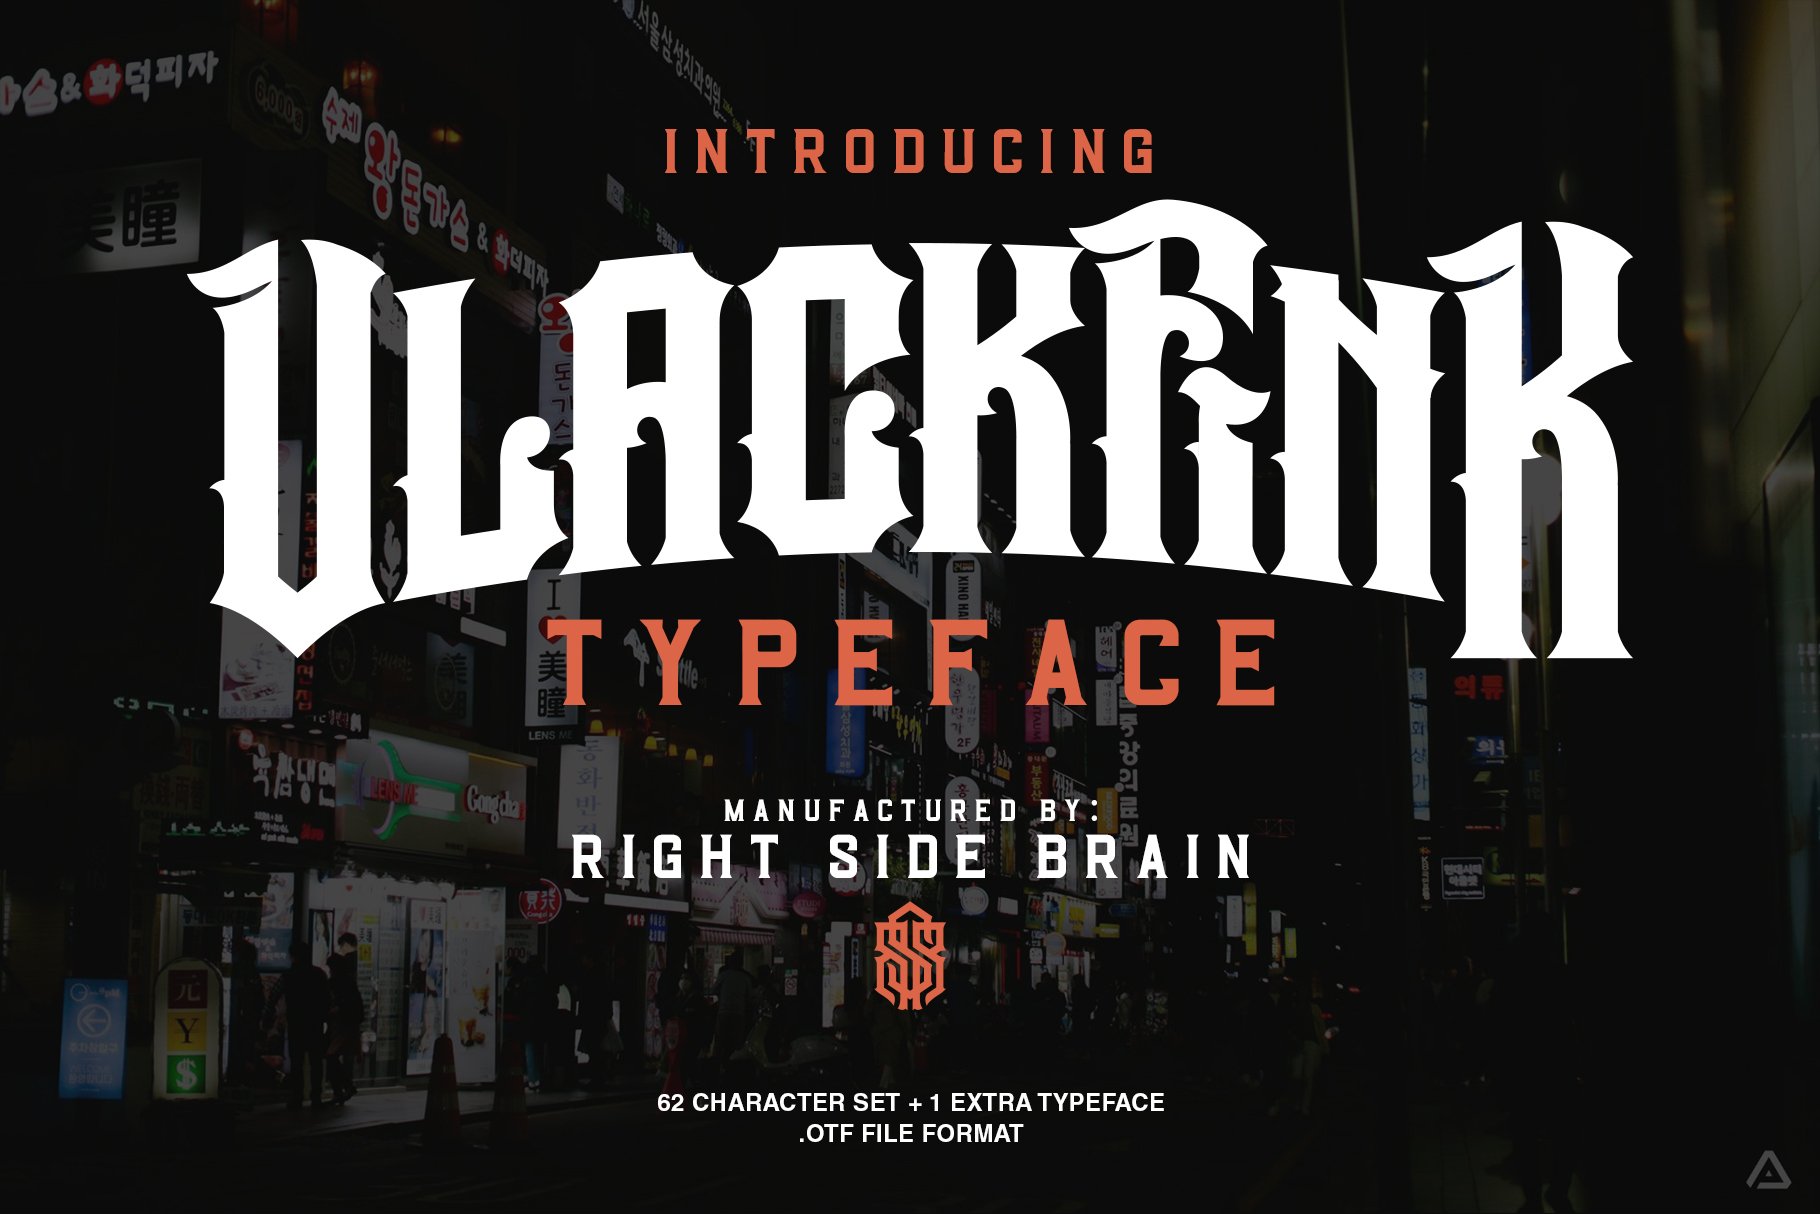 RSB VlackFink Typeface cover image.